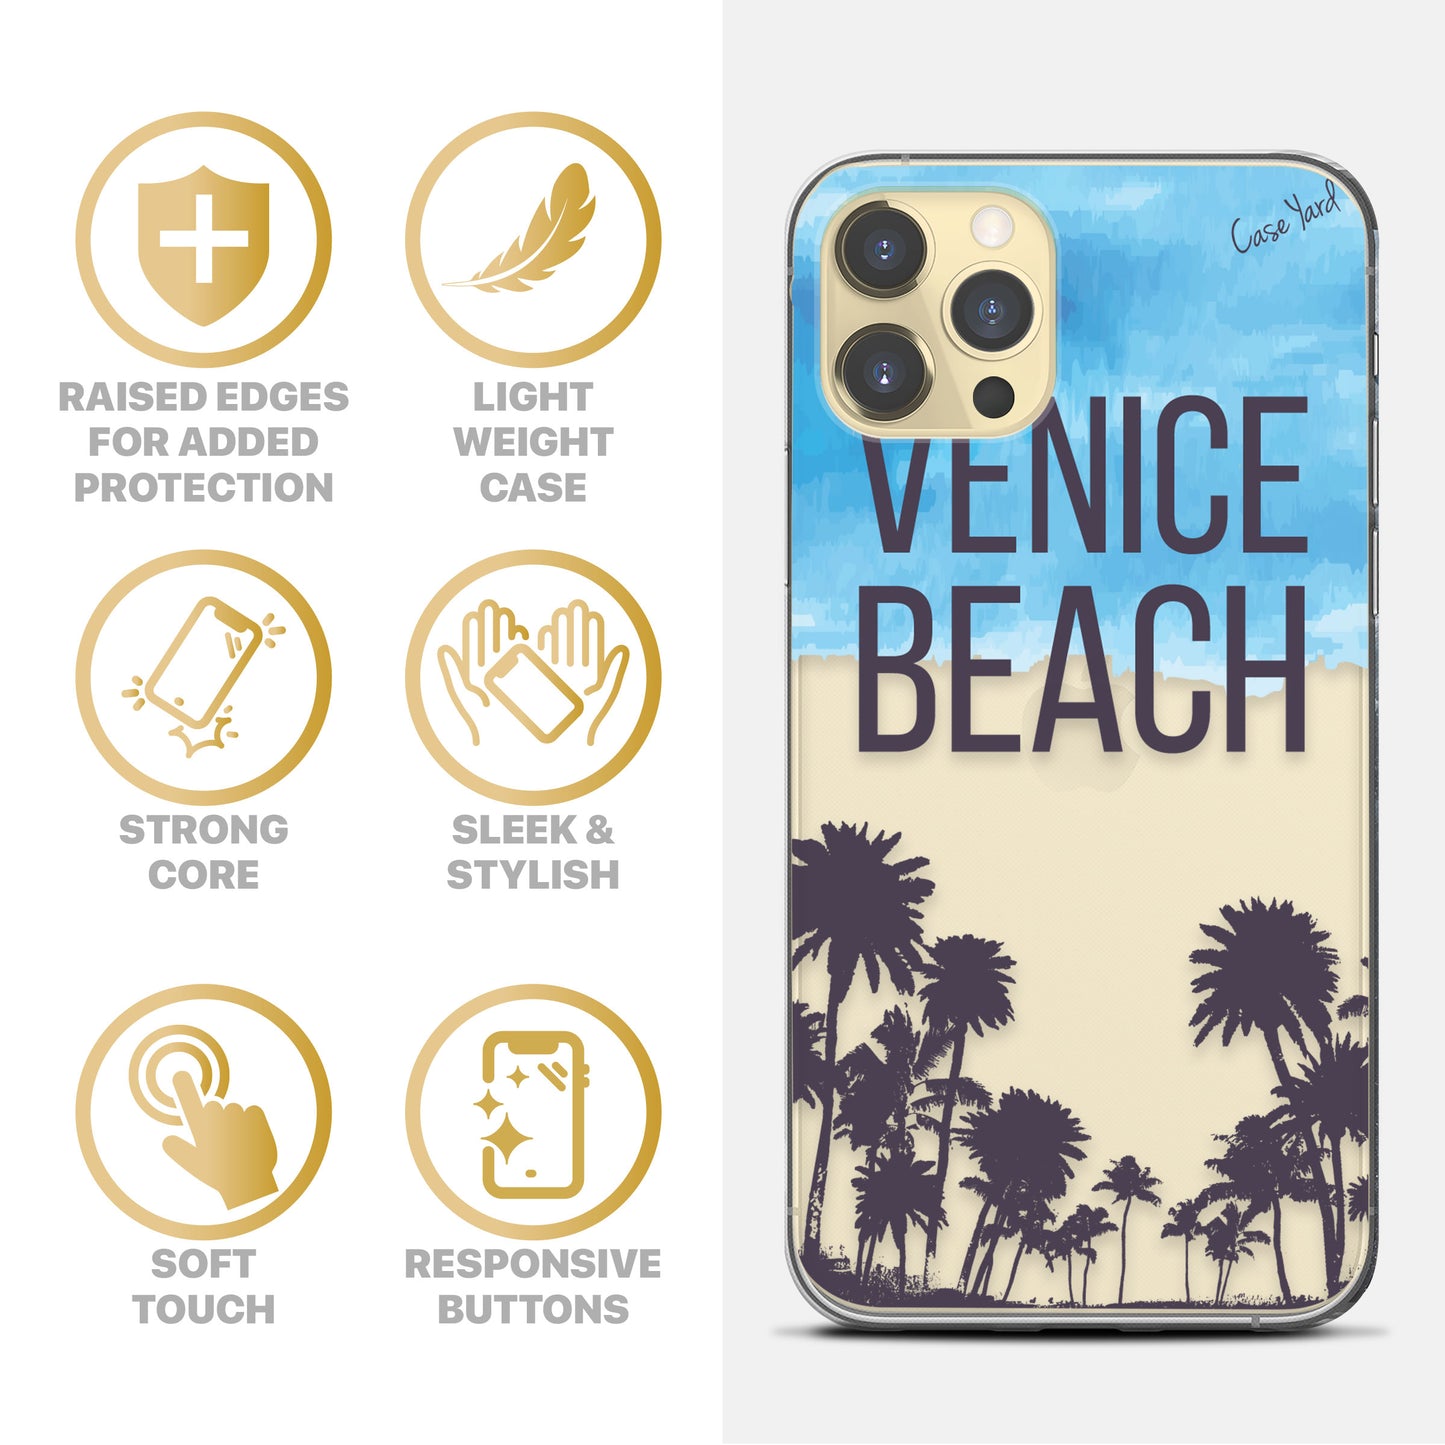 TPU Clear case with (Venice Beach) Design for iPhone & Samsung Phones